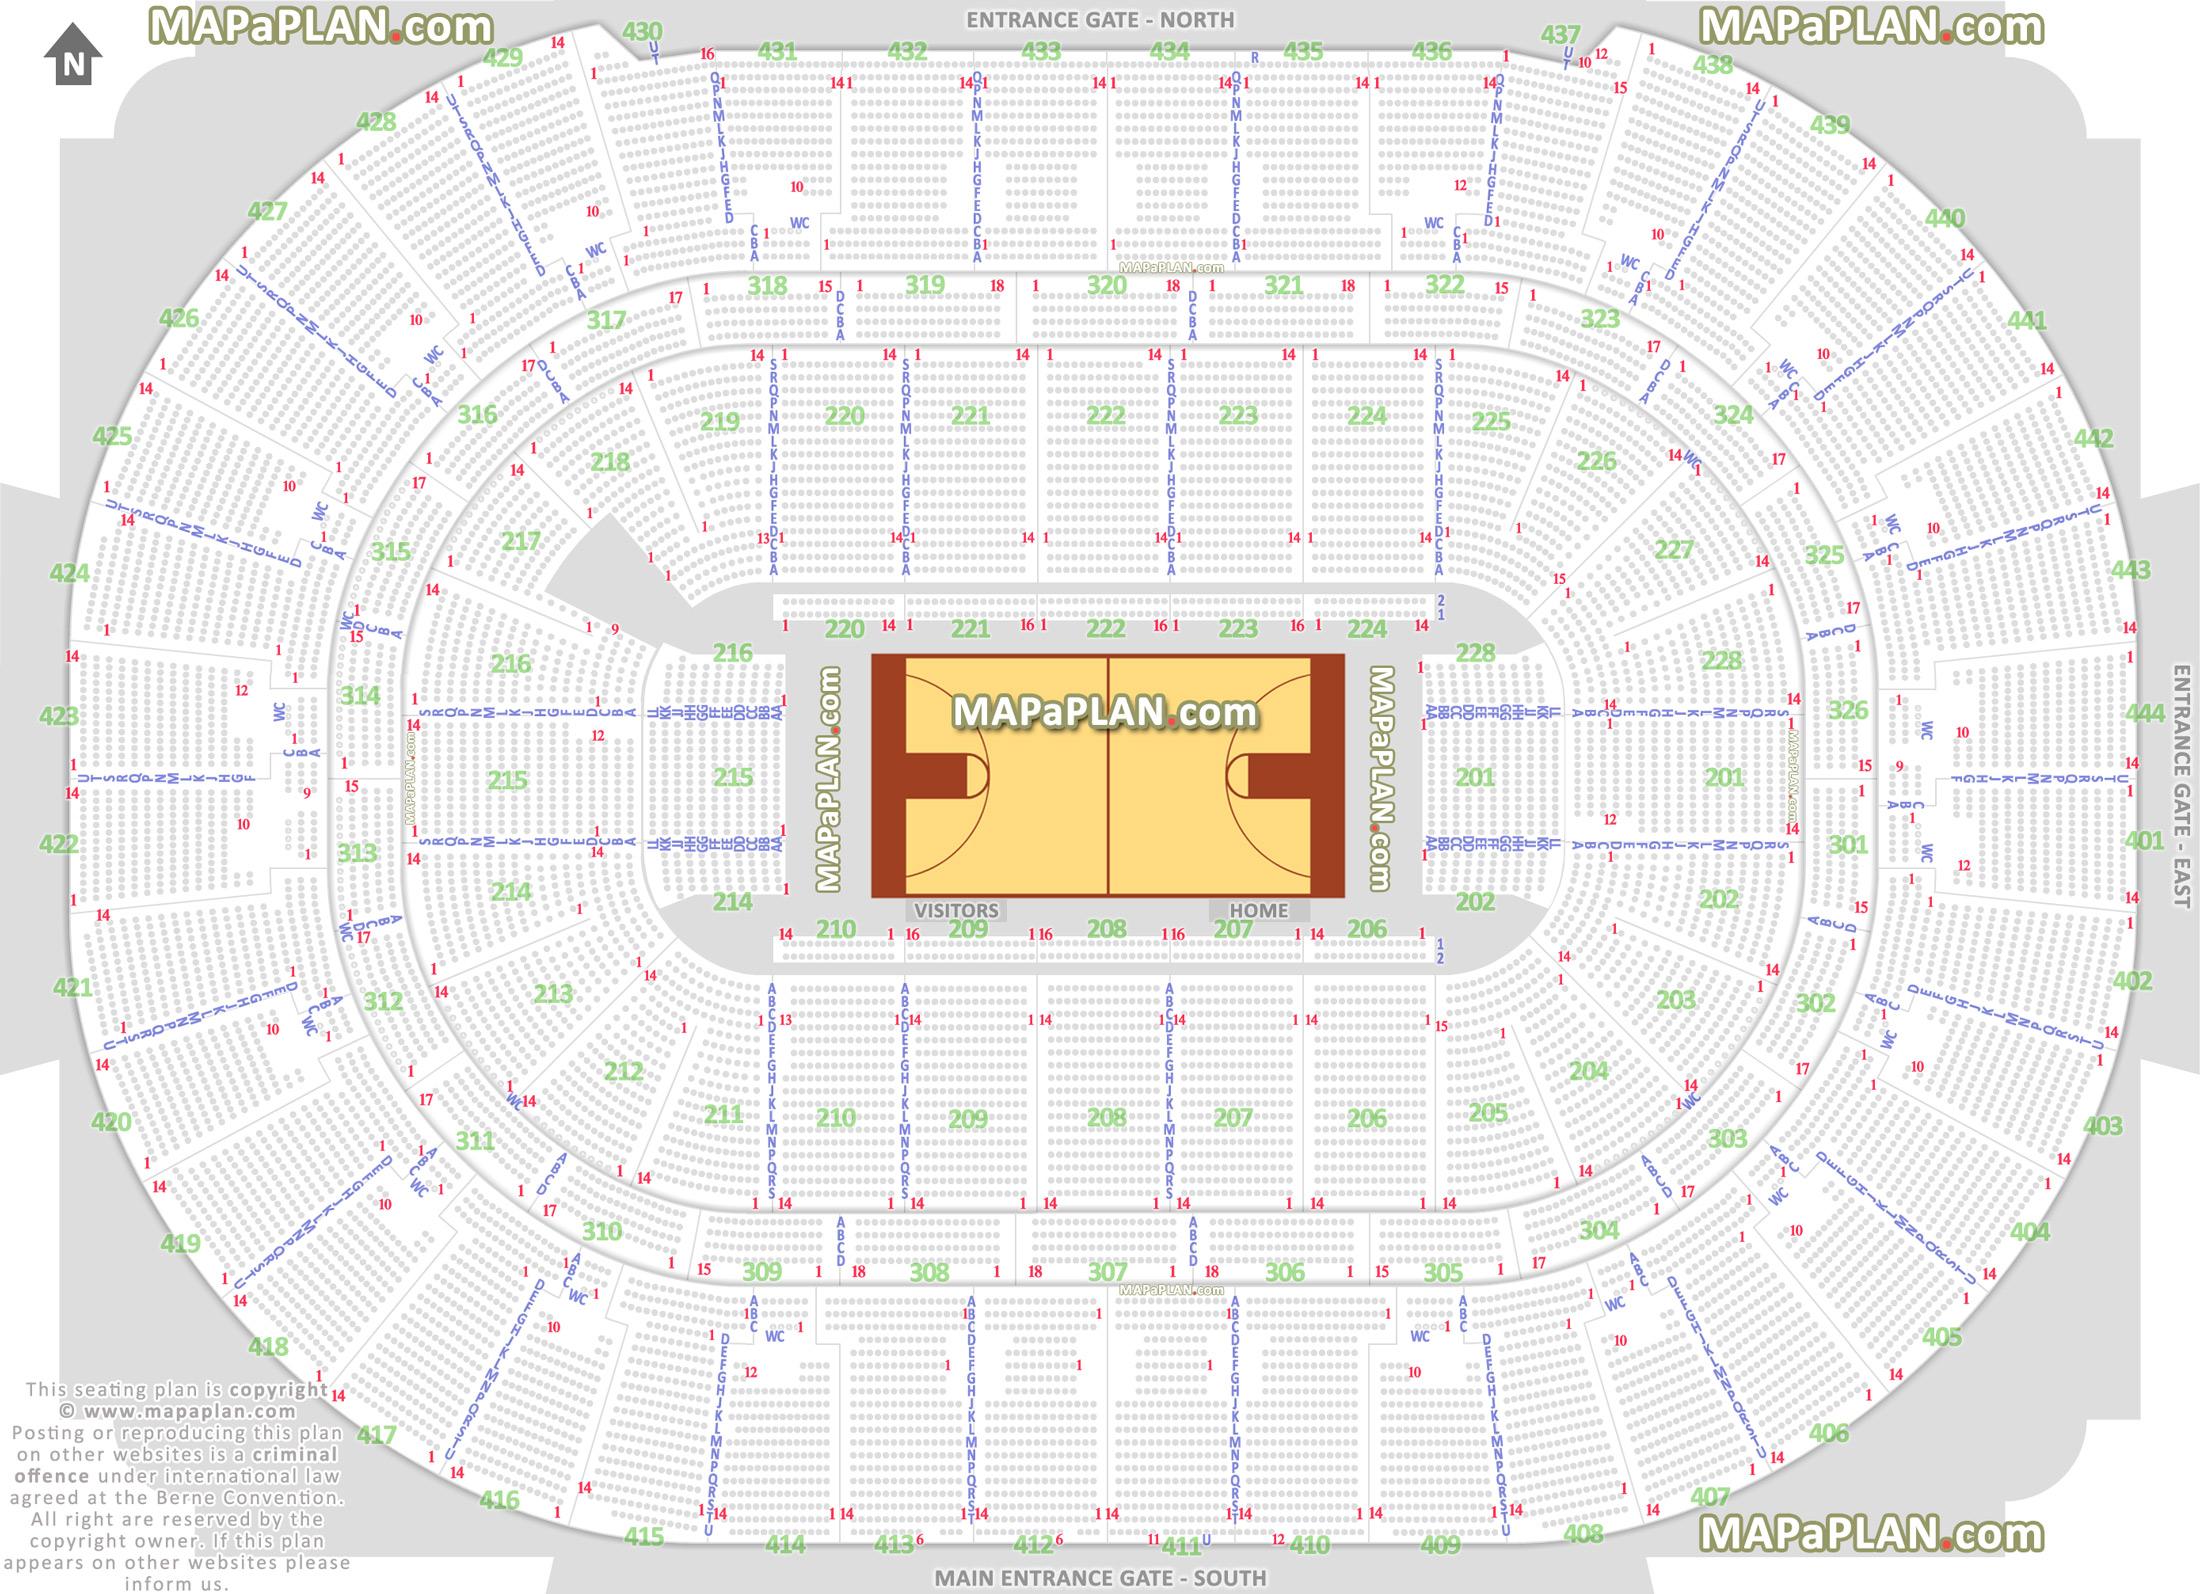 Honda Center Seating Chart With Rows